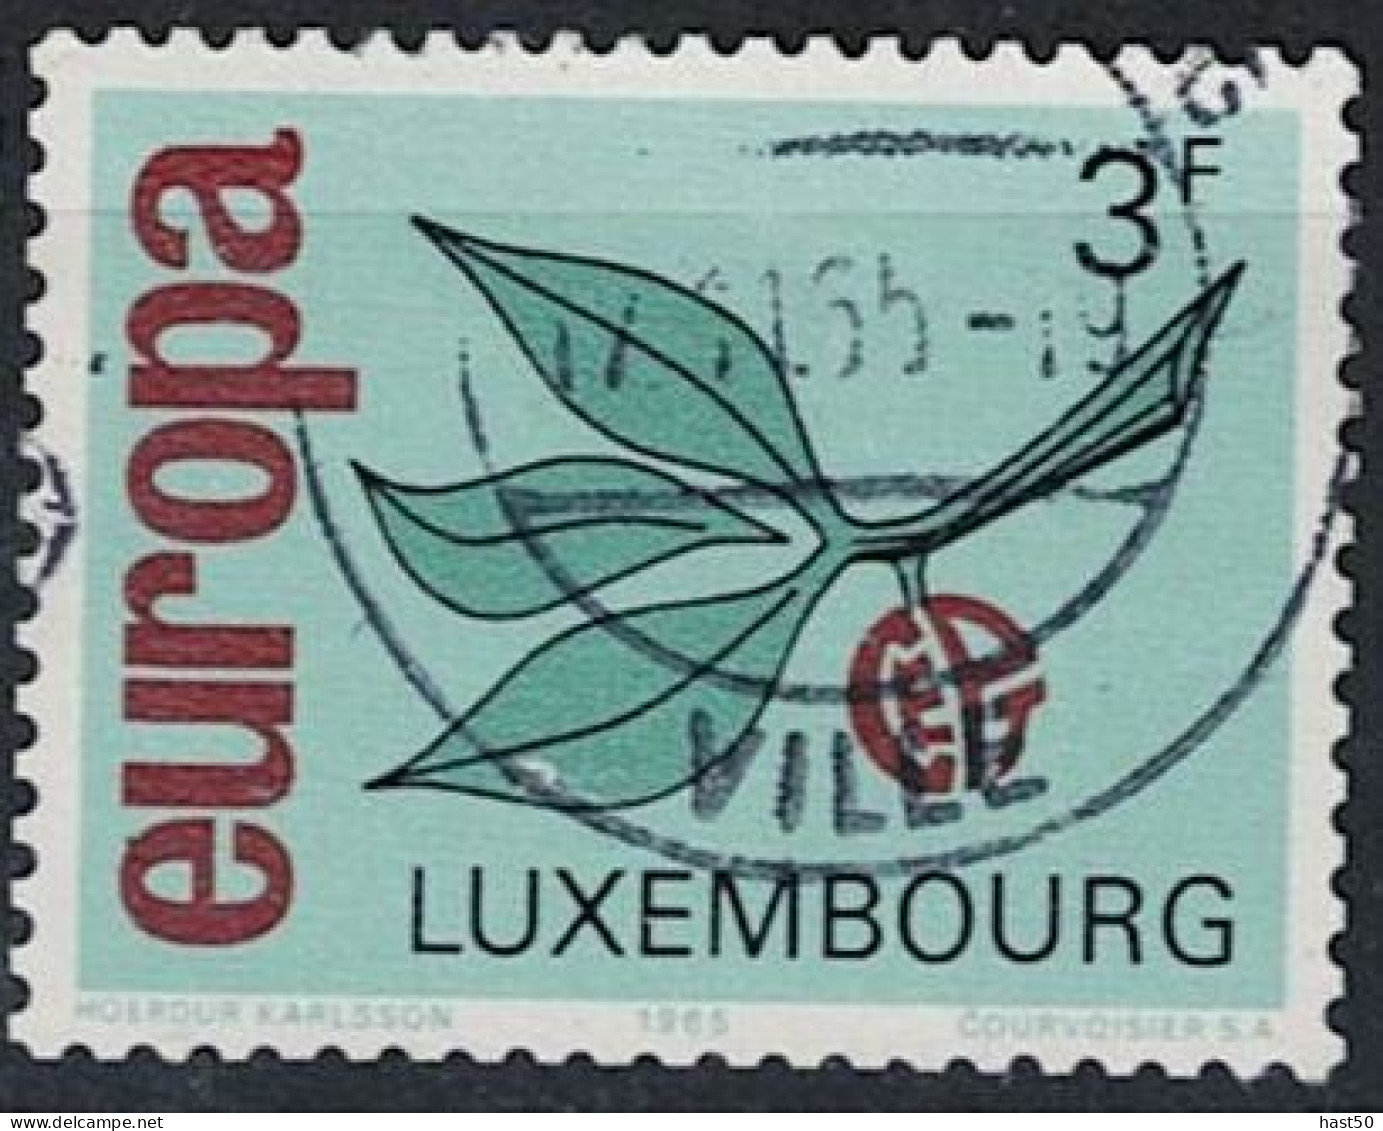 Luxemburg - Europs (MiNr: 715) 1965 - Gest Used Obl - Used Stamps